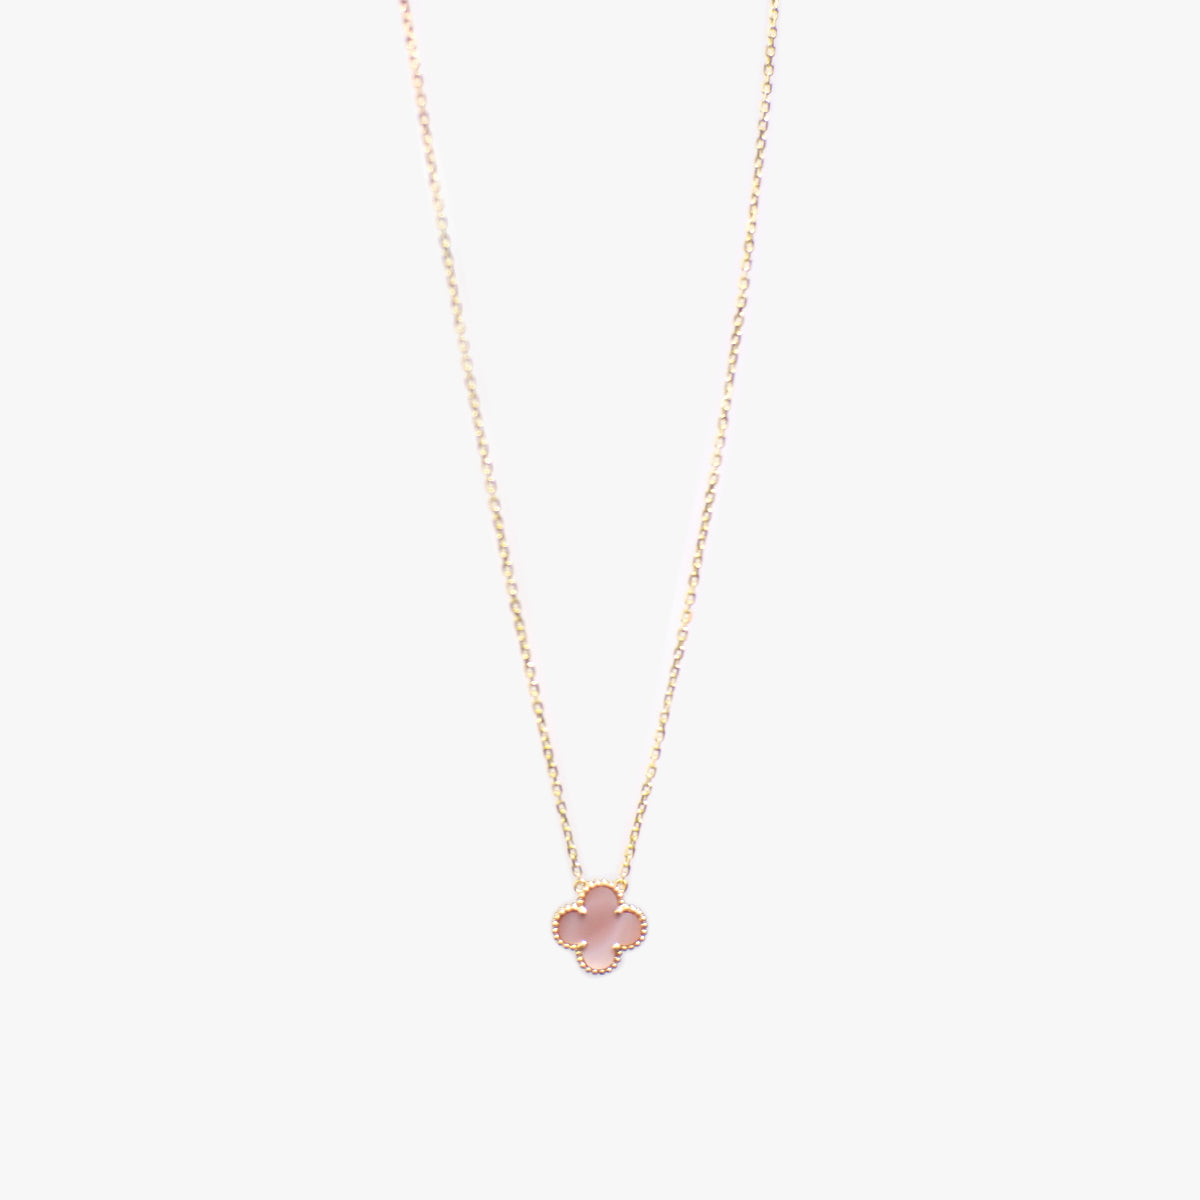 The 12mm/15mm Centered Clover Necklace in Solid Gold